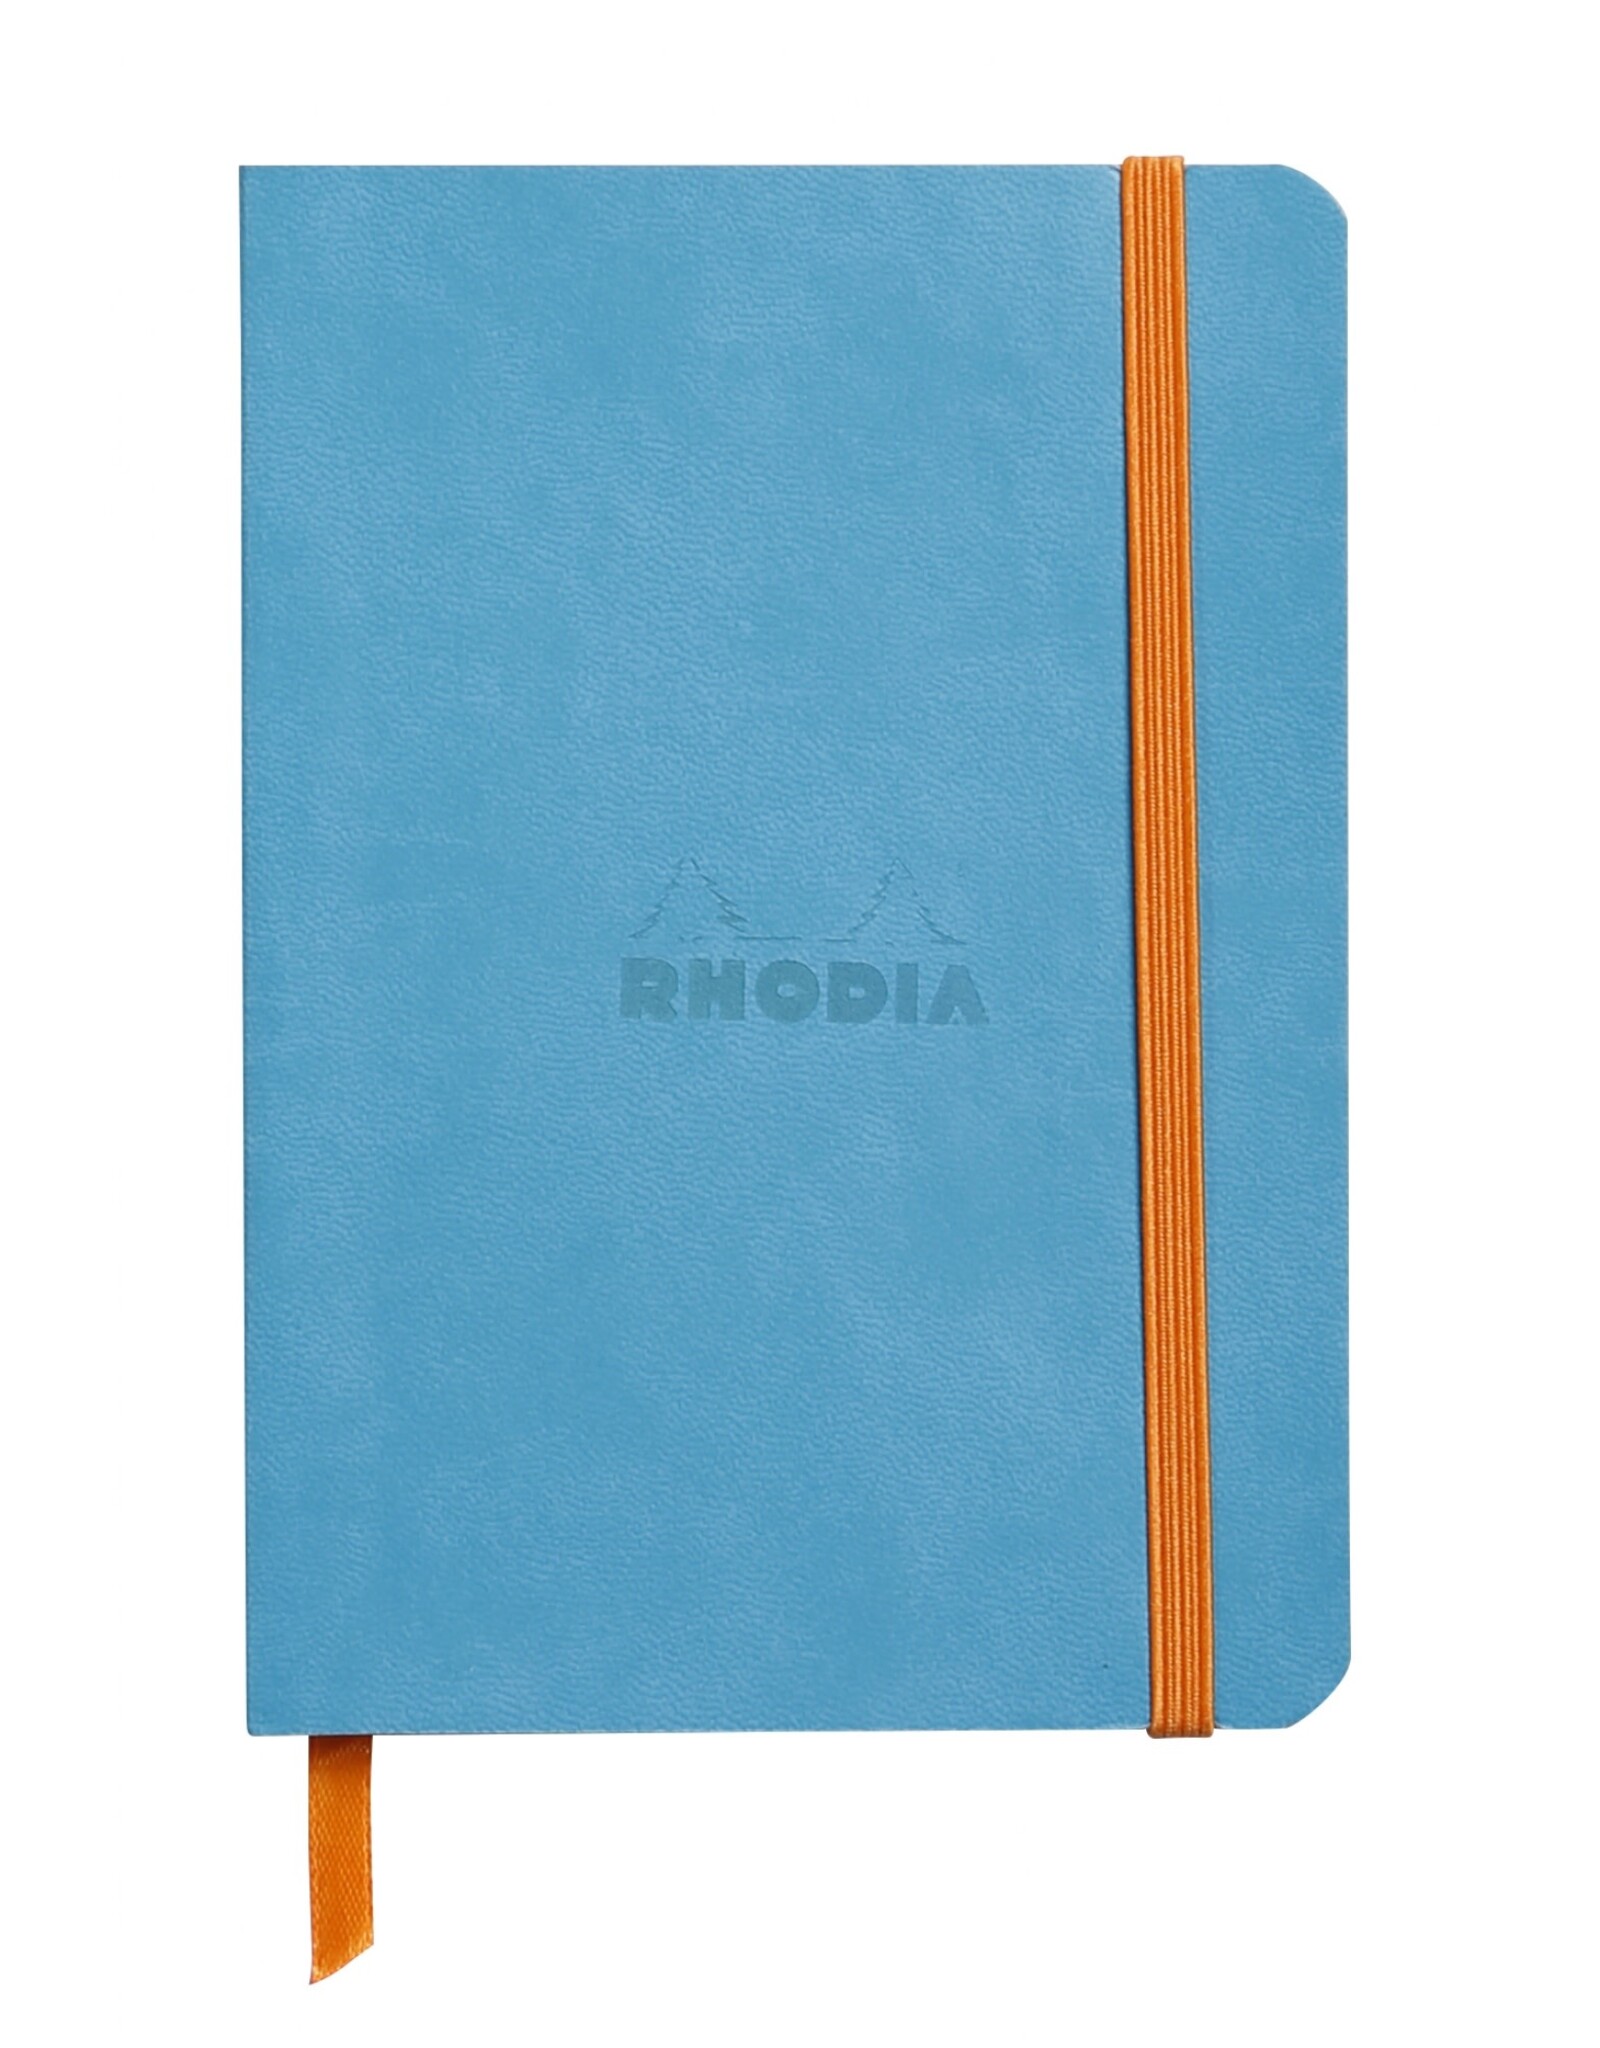 Rhodia Rhodia Rhodiarama SoftCover Notebook, 80 Lined Sheets, 4" x 5 1/2", Turquoise